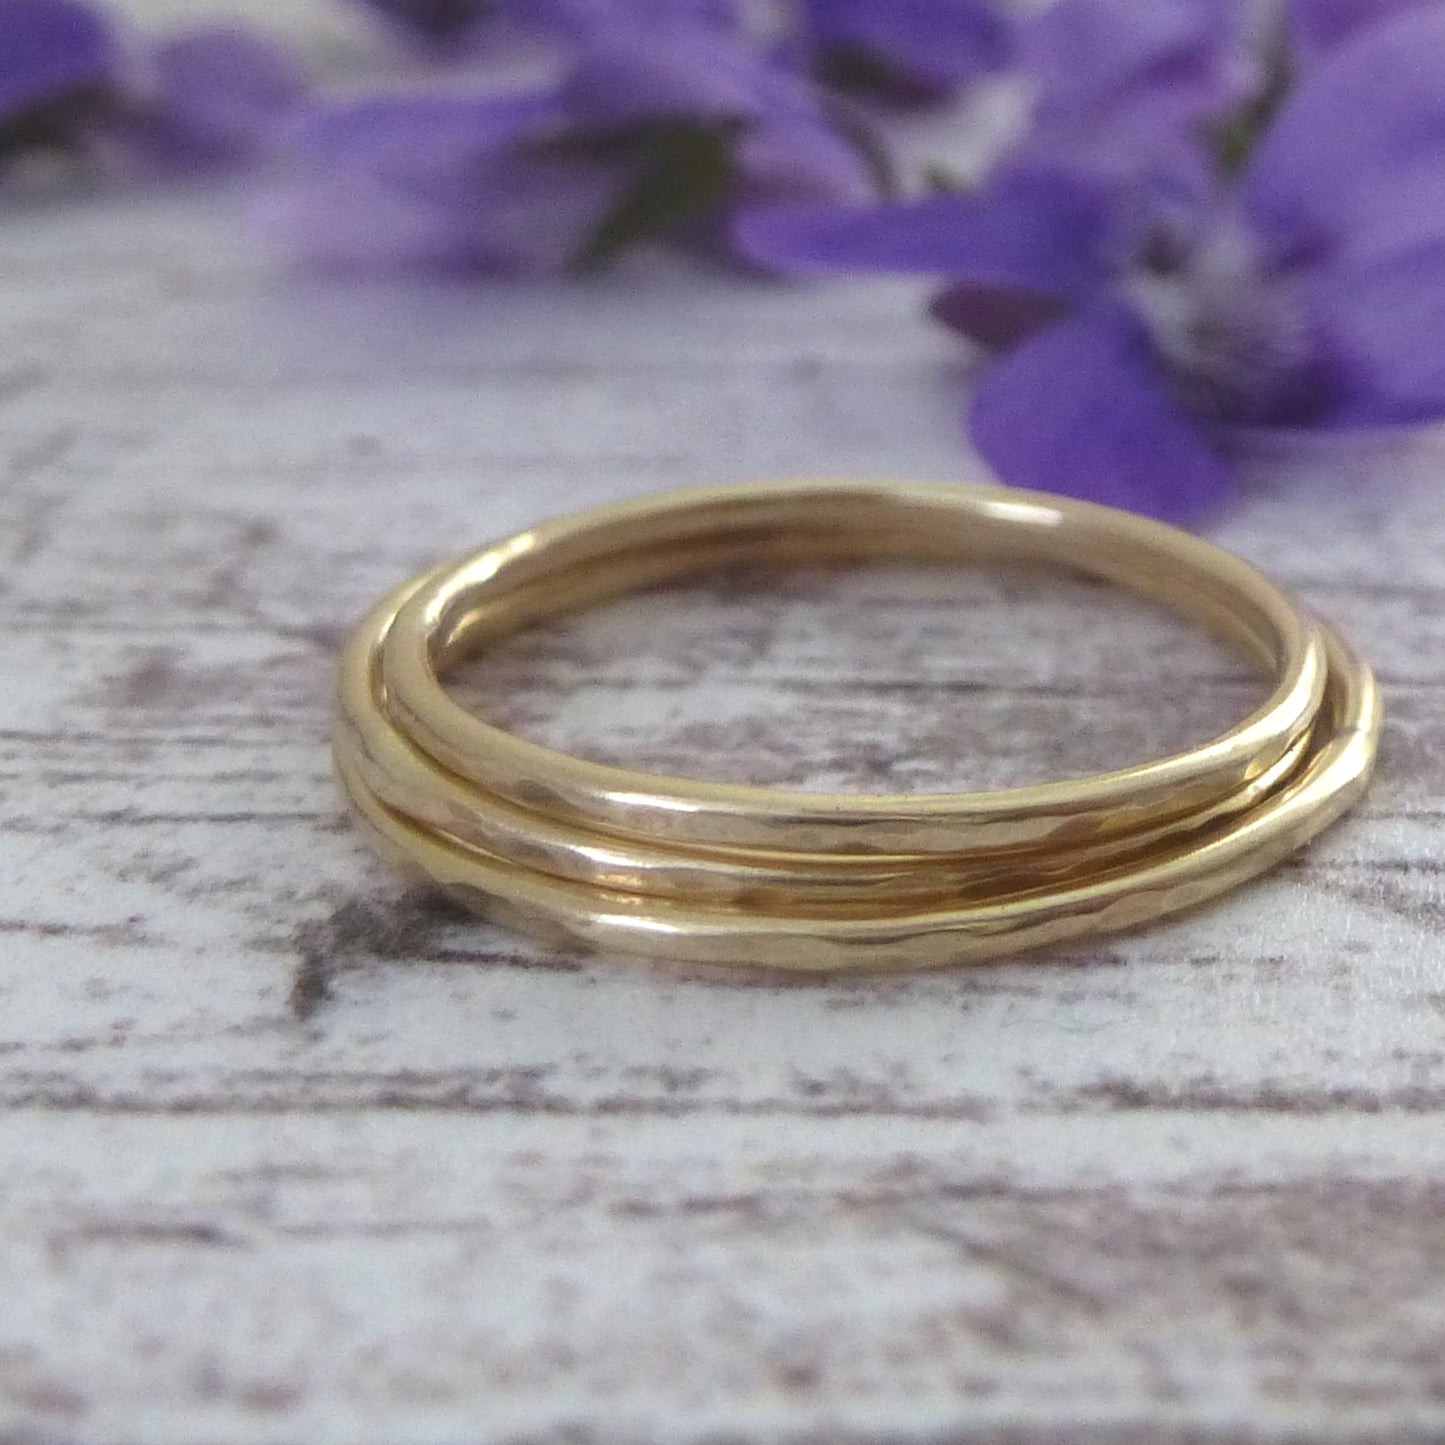 Skinny smooth band ring - 9ct yellow gold